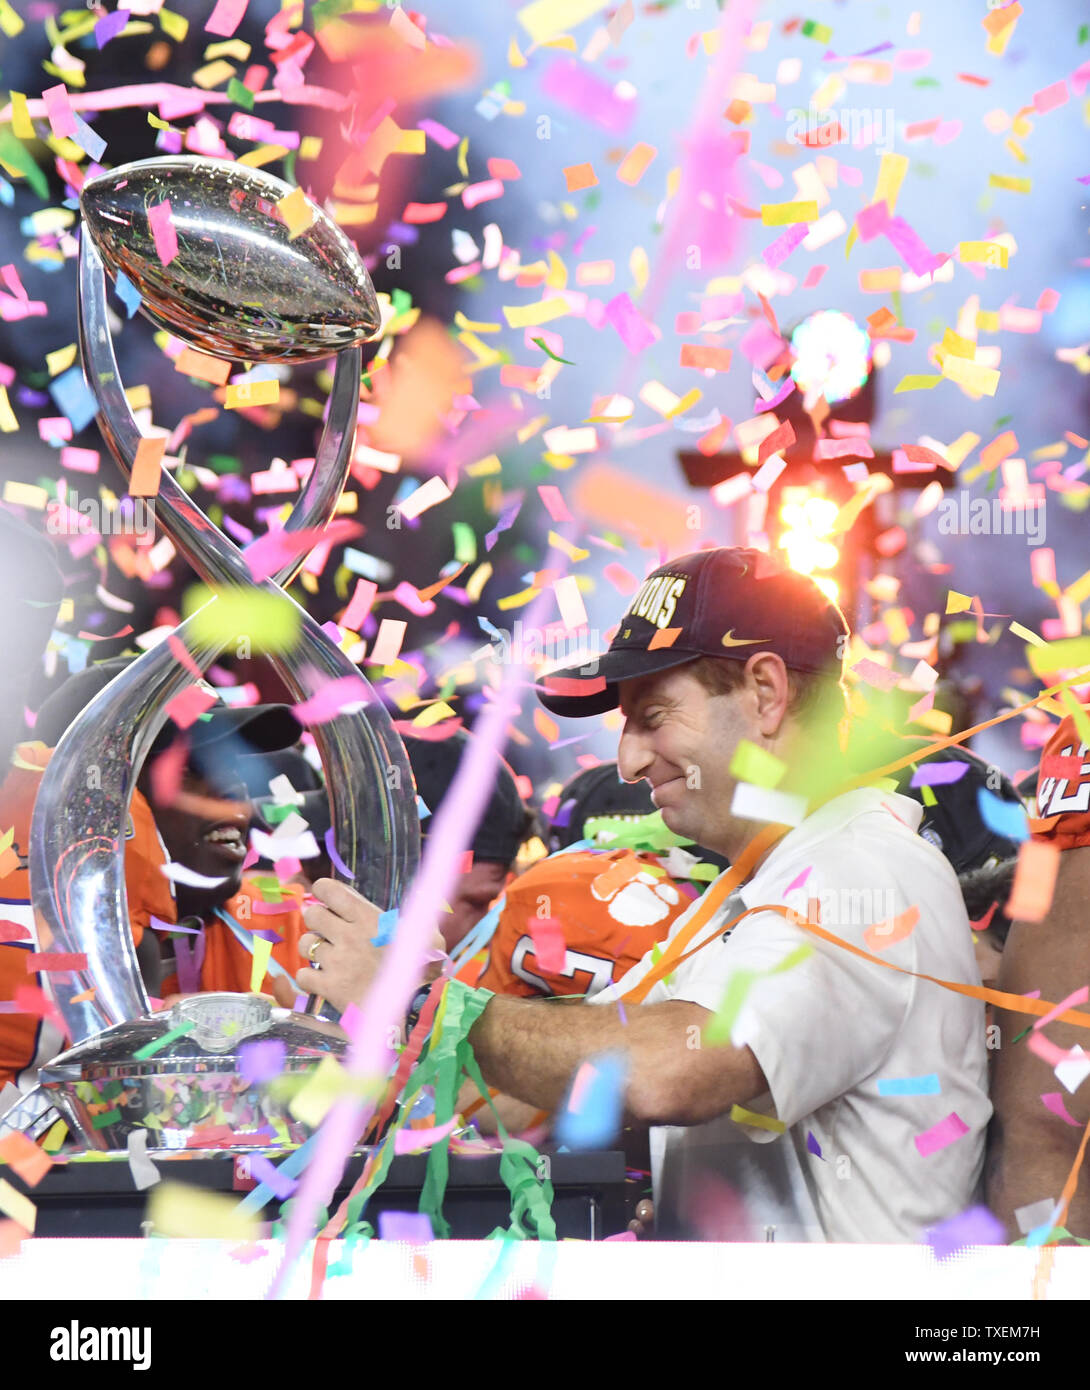 Clemson head coach Dabo Swinney pick up the Field Scovell Trophy after beating Notre Dame 30-3 in the College Football Playoff Semifinal at the Goodyear Cotton Bowl Classic at AT&T Stadium in Arlington, Texas on December 29, 2018. The Tigers will face the winner of the CFP Semifinal at the Capital One Orange Bowl in the National Championship Game on January 7, 2019. Photo by Ian Halperin/UPI Stock Photo